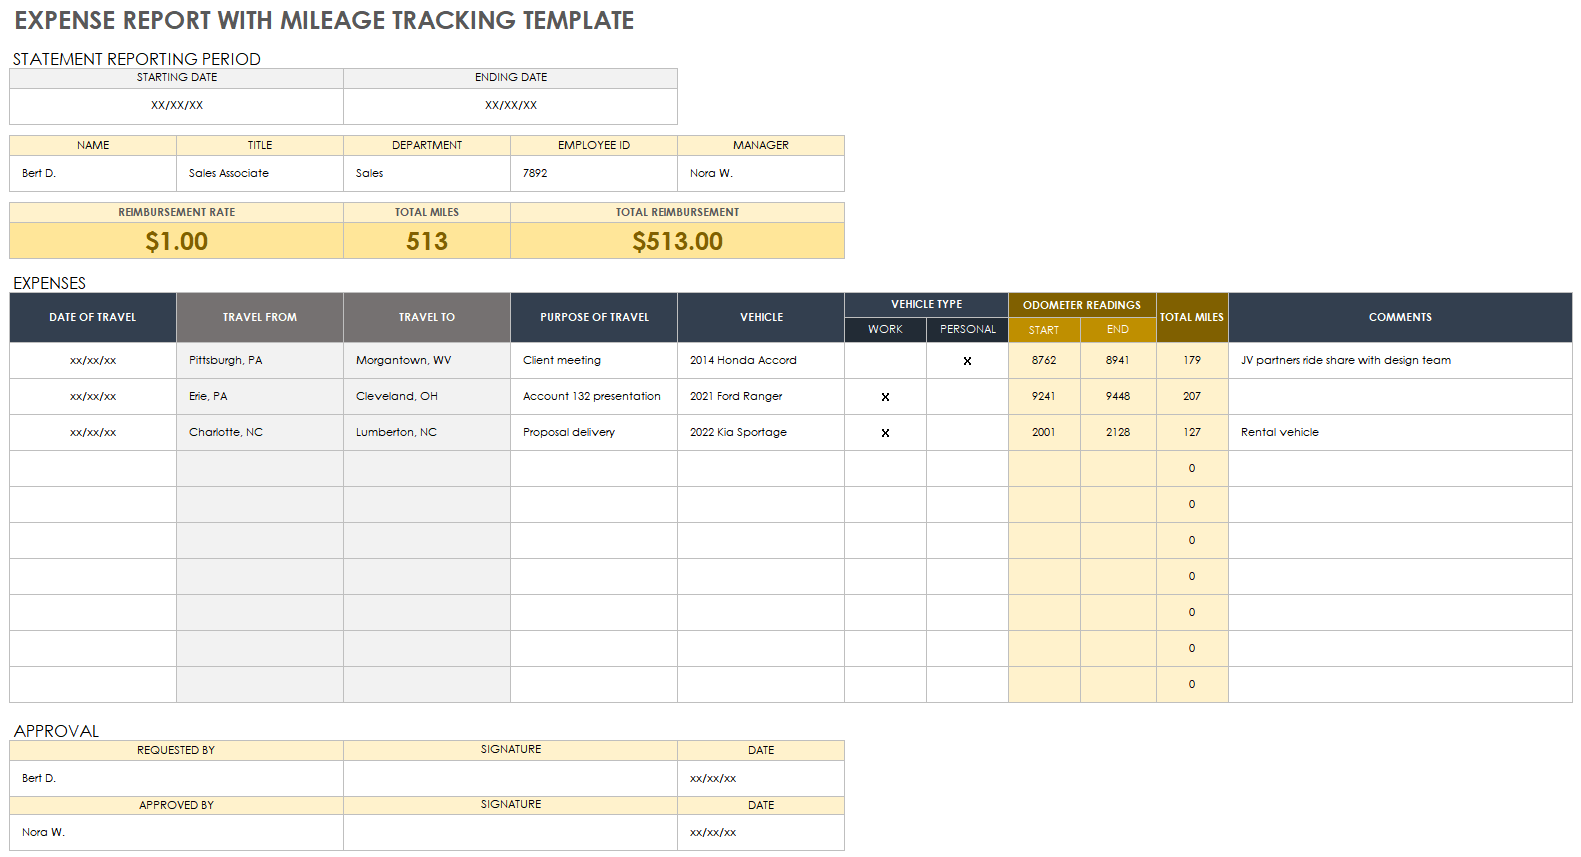 Expense Report With Mileage Tracking Template